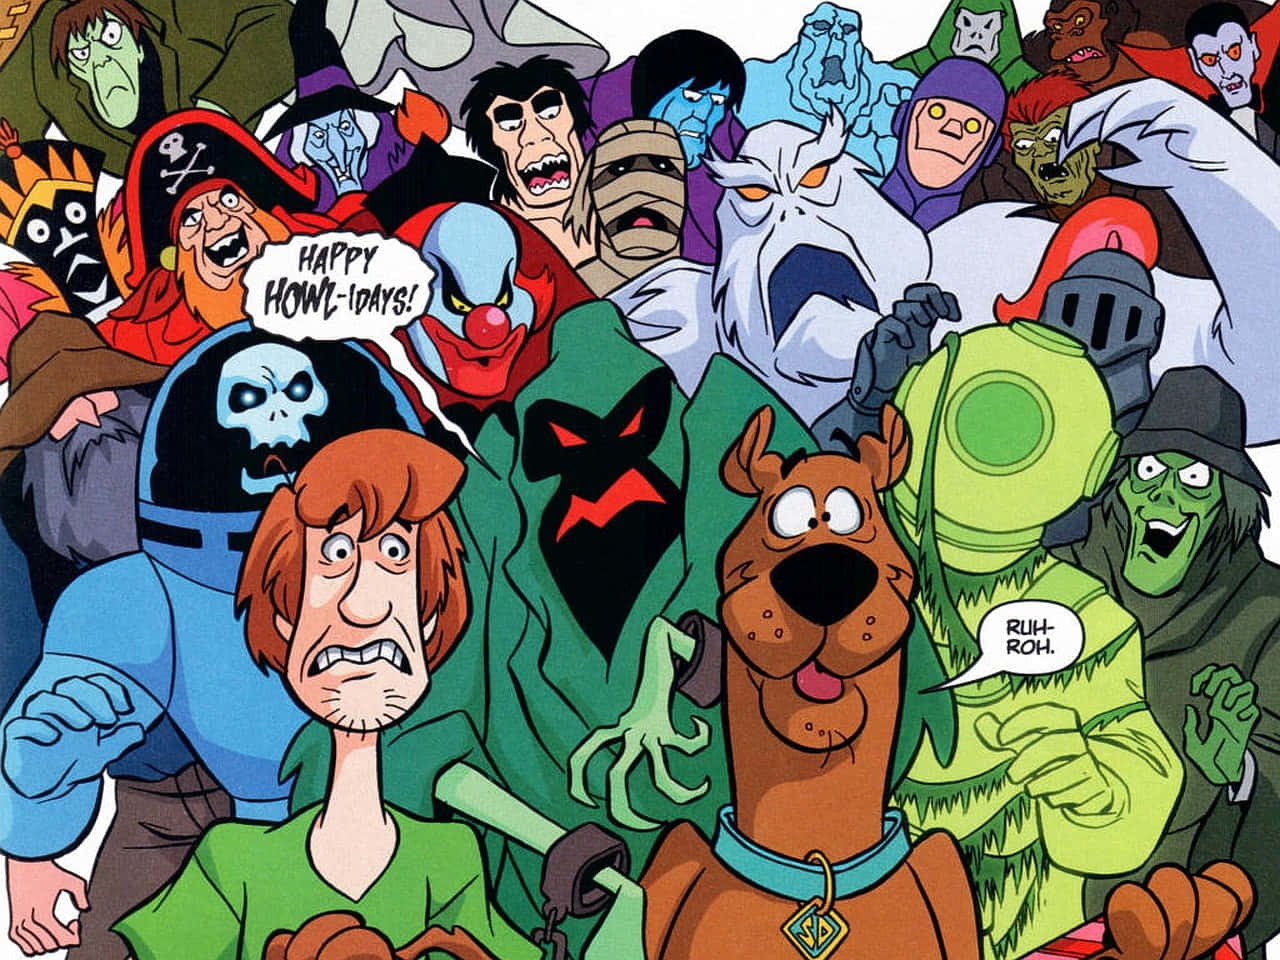 "That's the Scooby-Doo Gang, ready for adventure!"